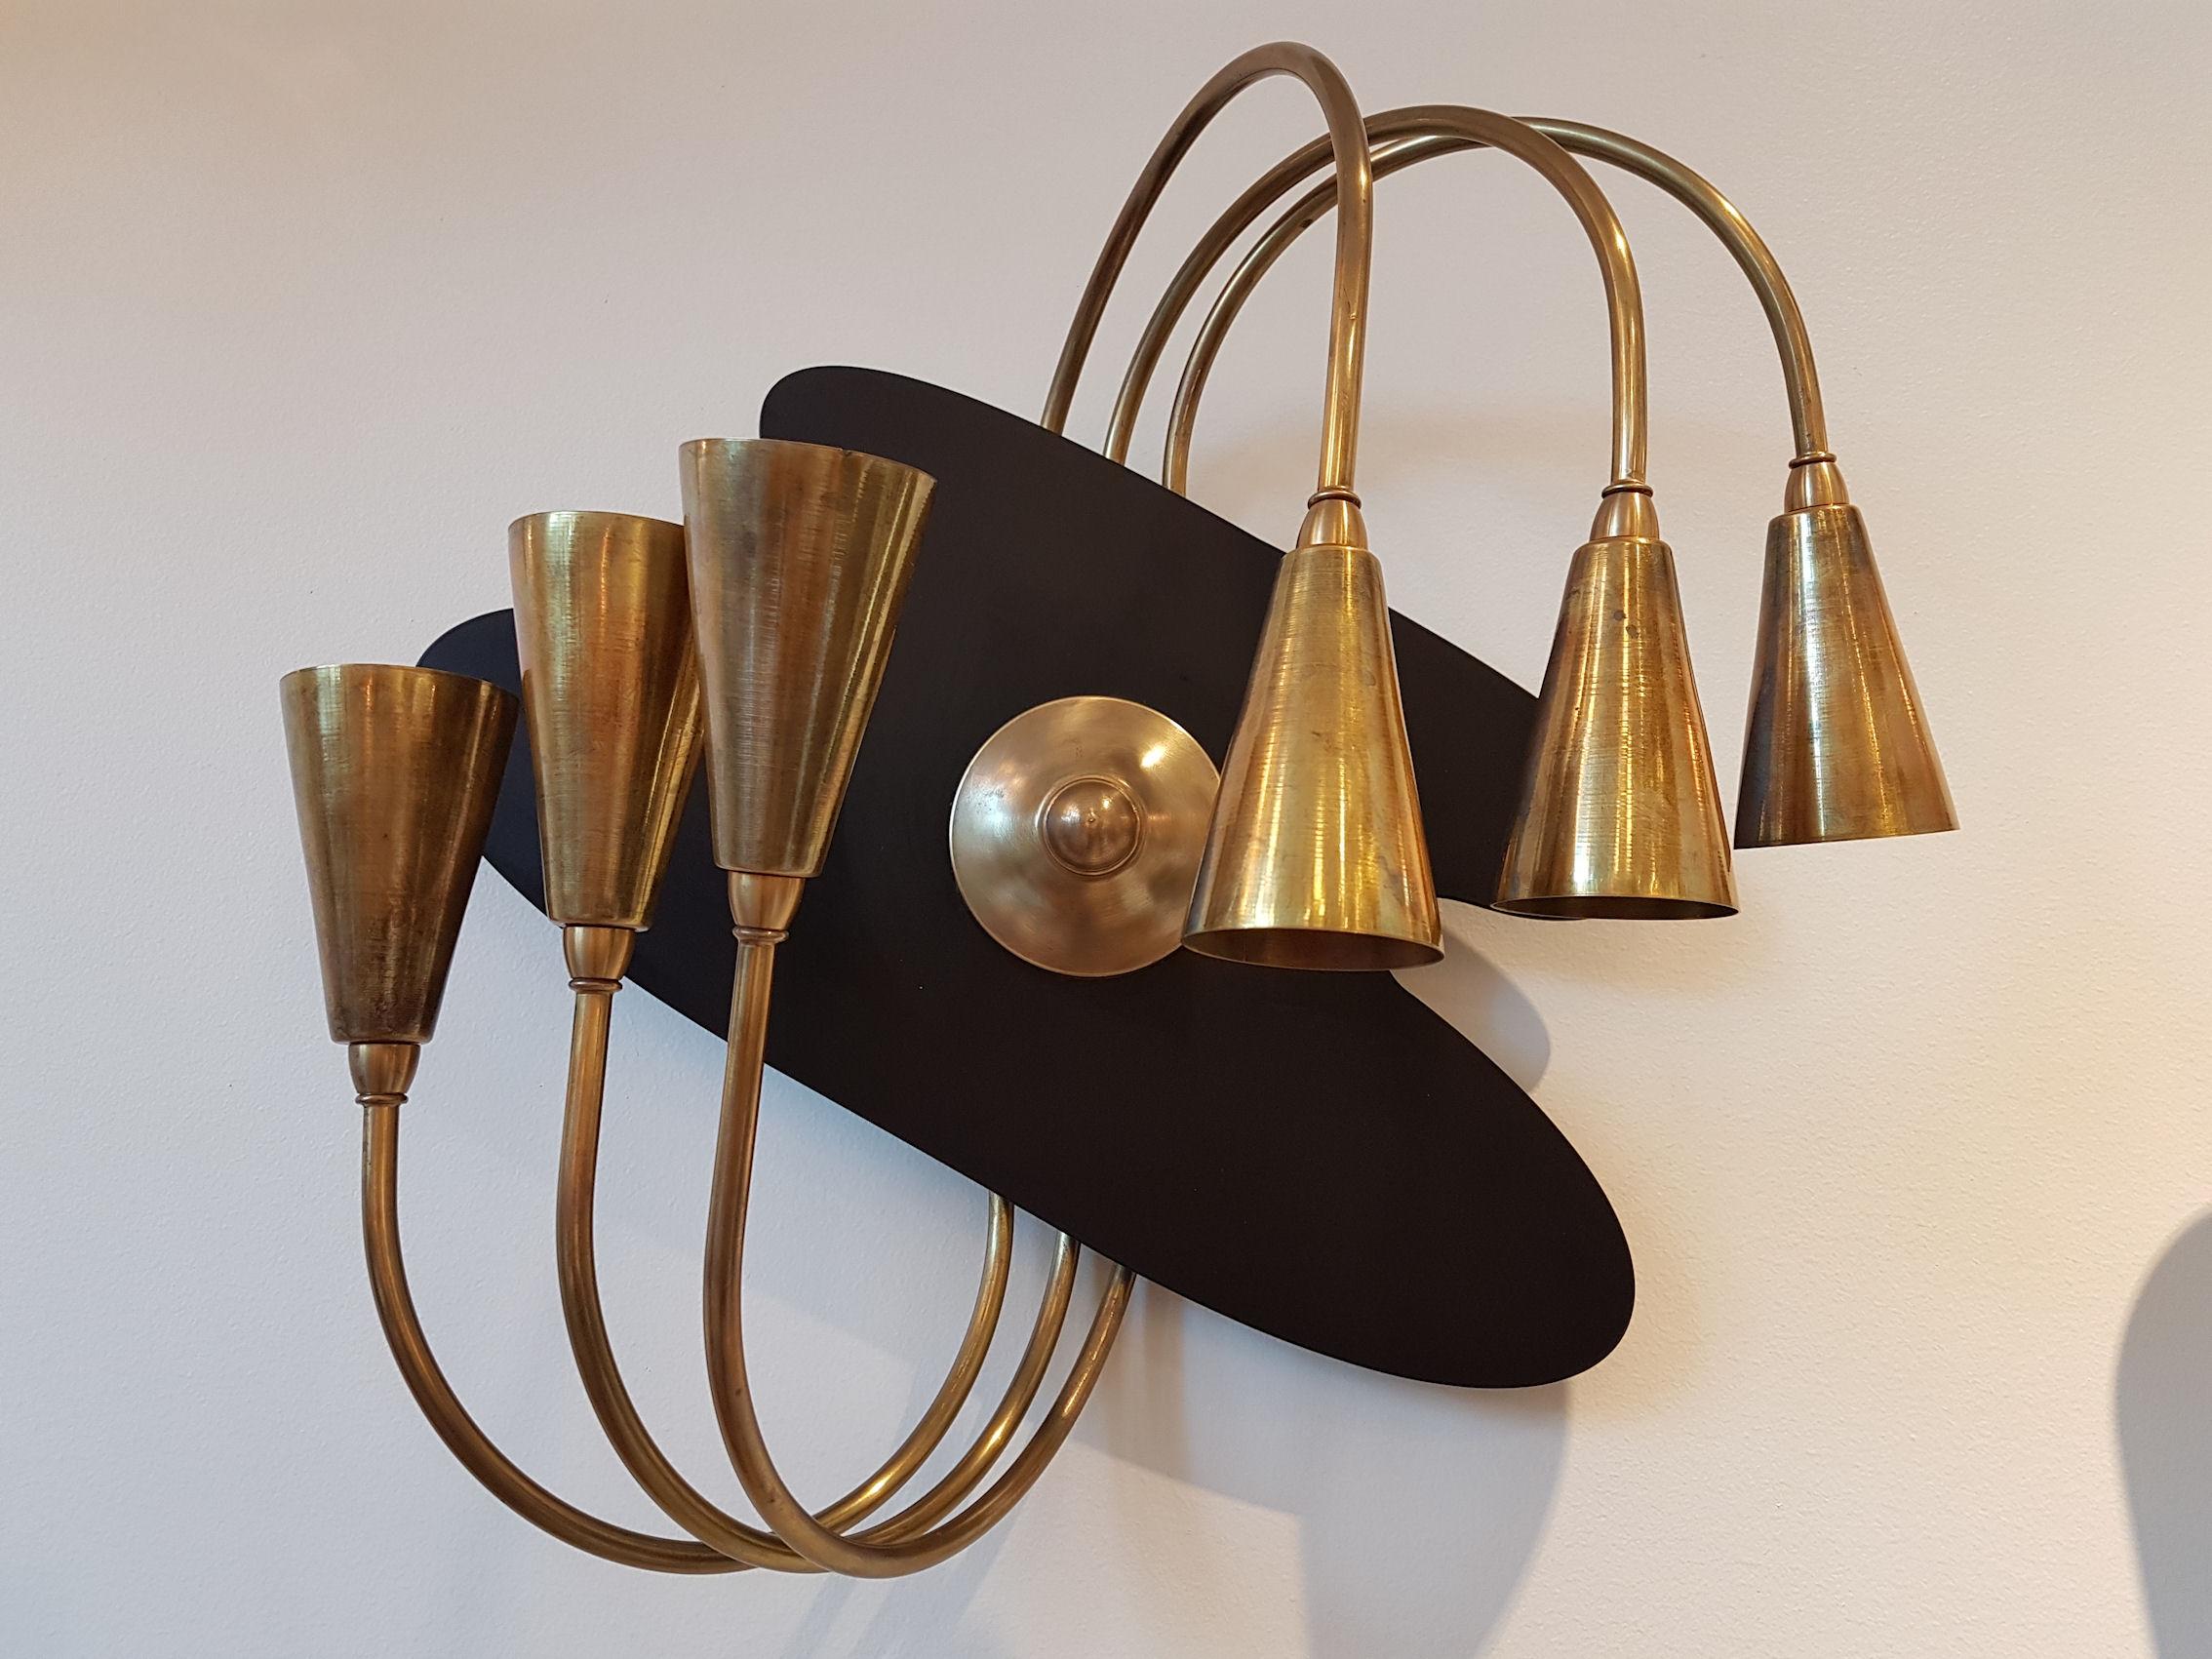 Pair of Large brass, Italian, Mid-Century Modern wall sconces, attributed to Stilnovo, with a painter's palette shape.
Italy, 1960s.
6 lights each, rewired.
The back plate is black enameled and the 6 arms are brass, with a nice patina.
They can